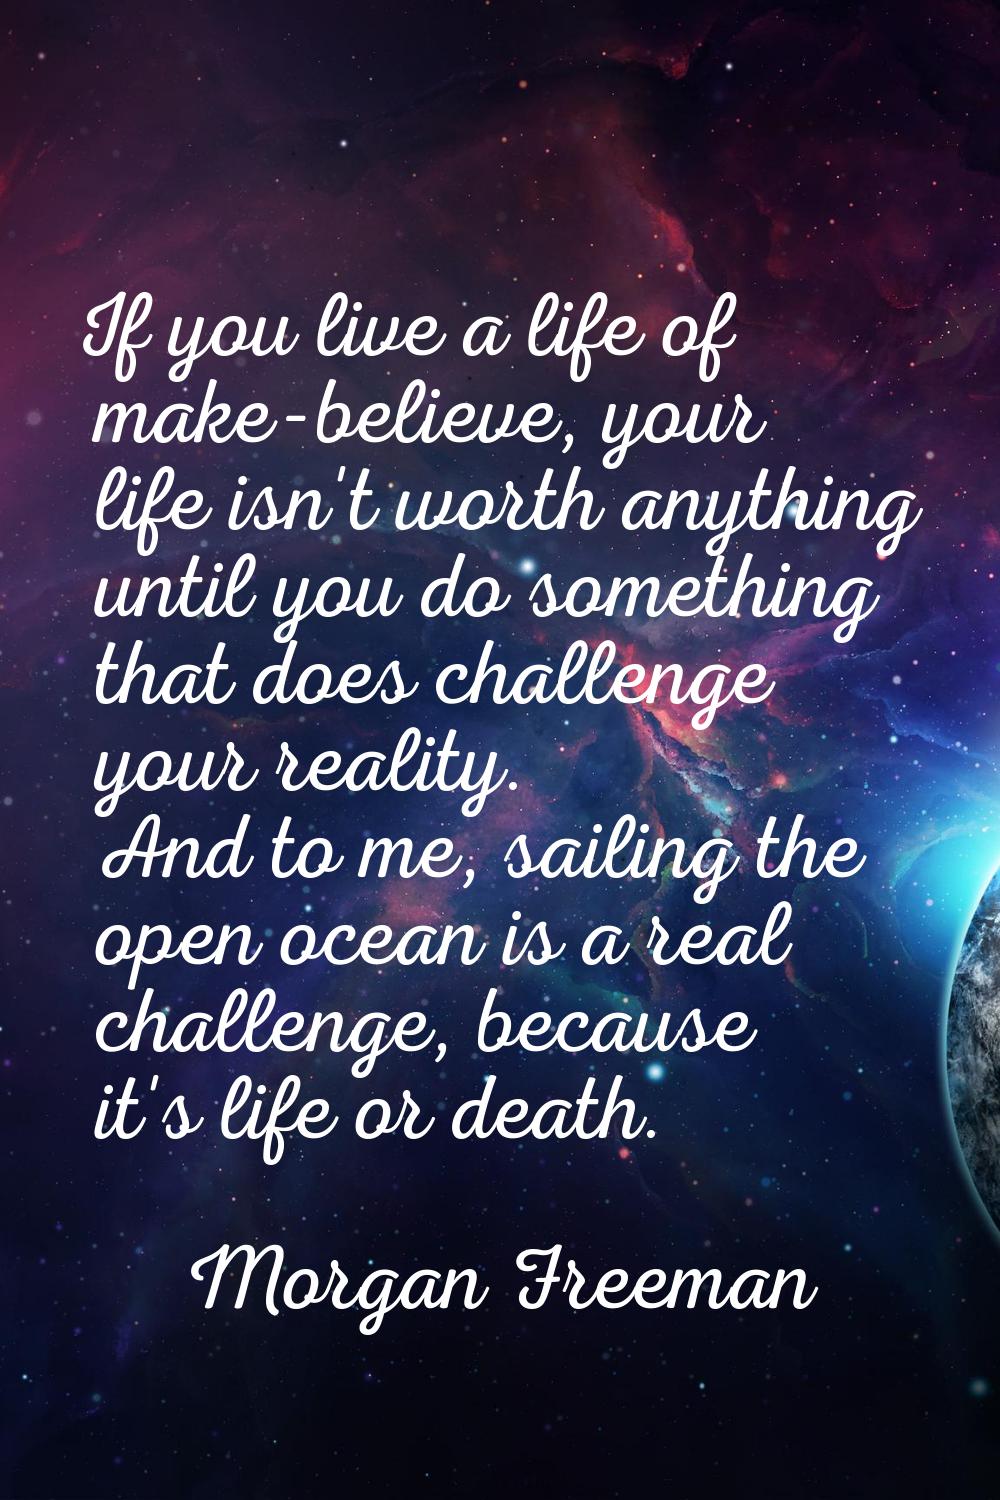 If you live a life of make-believe, your life isn't worth anything until you do something that does